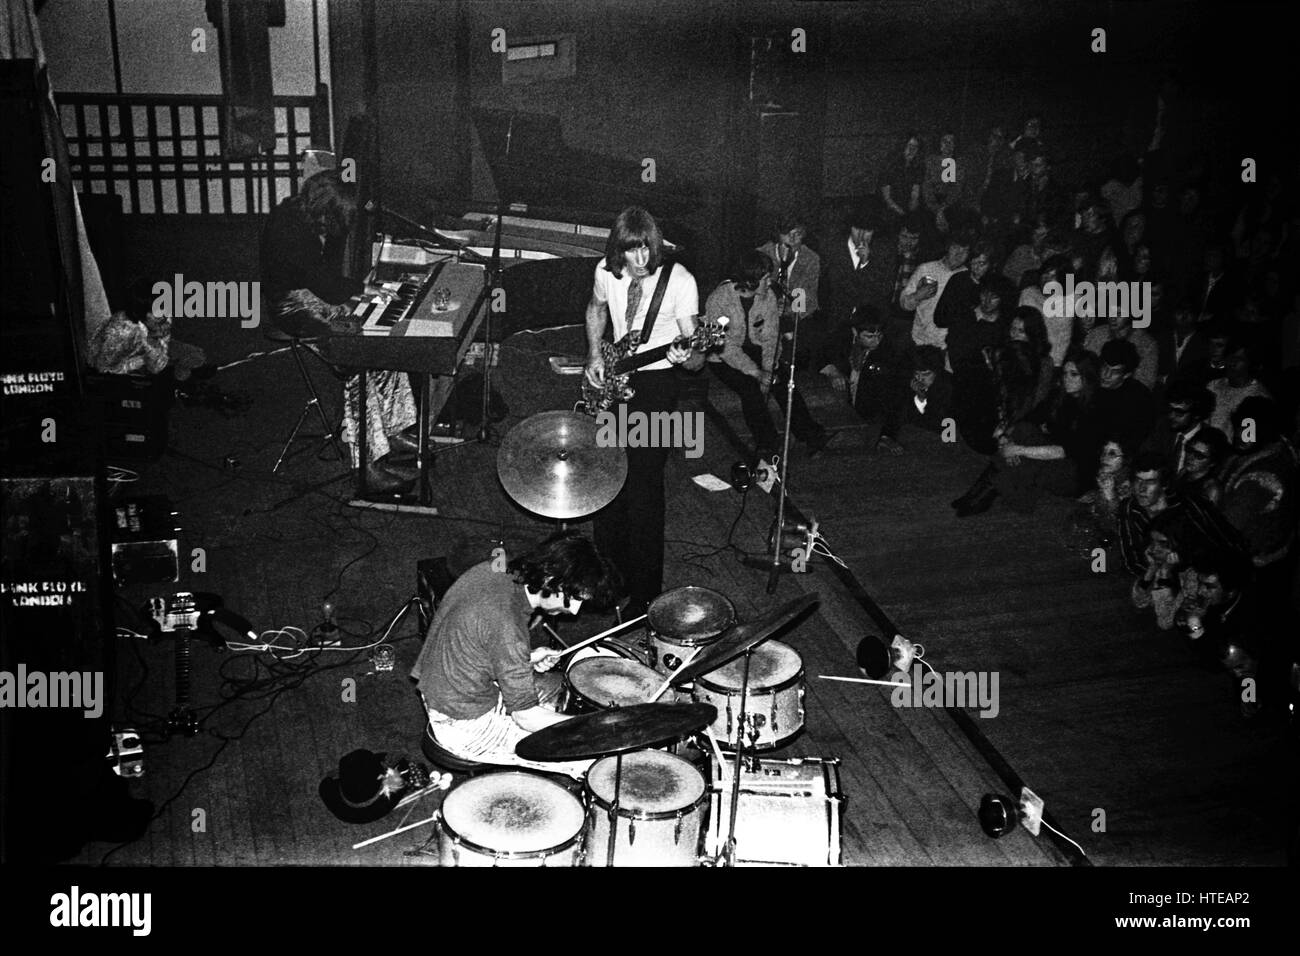 PINK FLOYD: The UK rock band Pink Floyd play the Victoria Rooms, Bristol University on 3 March 1969. Stock Photo